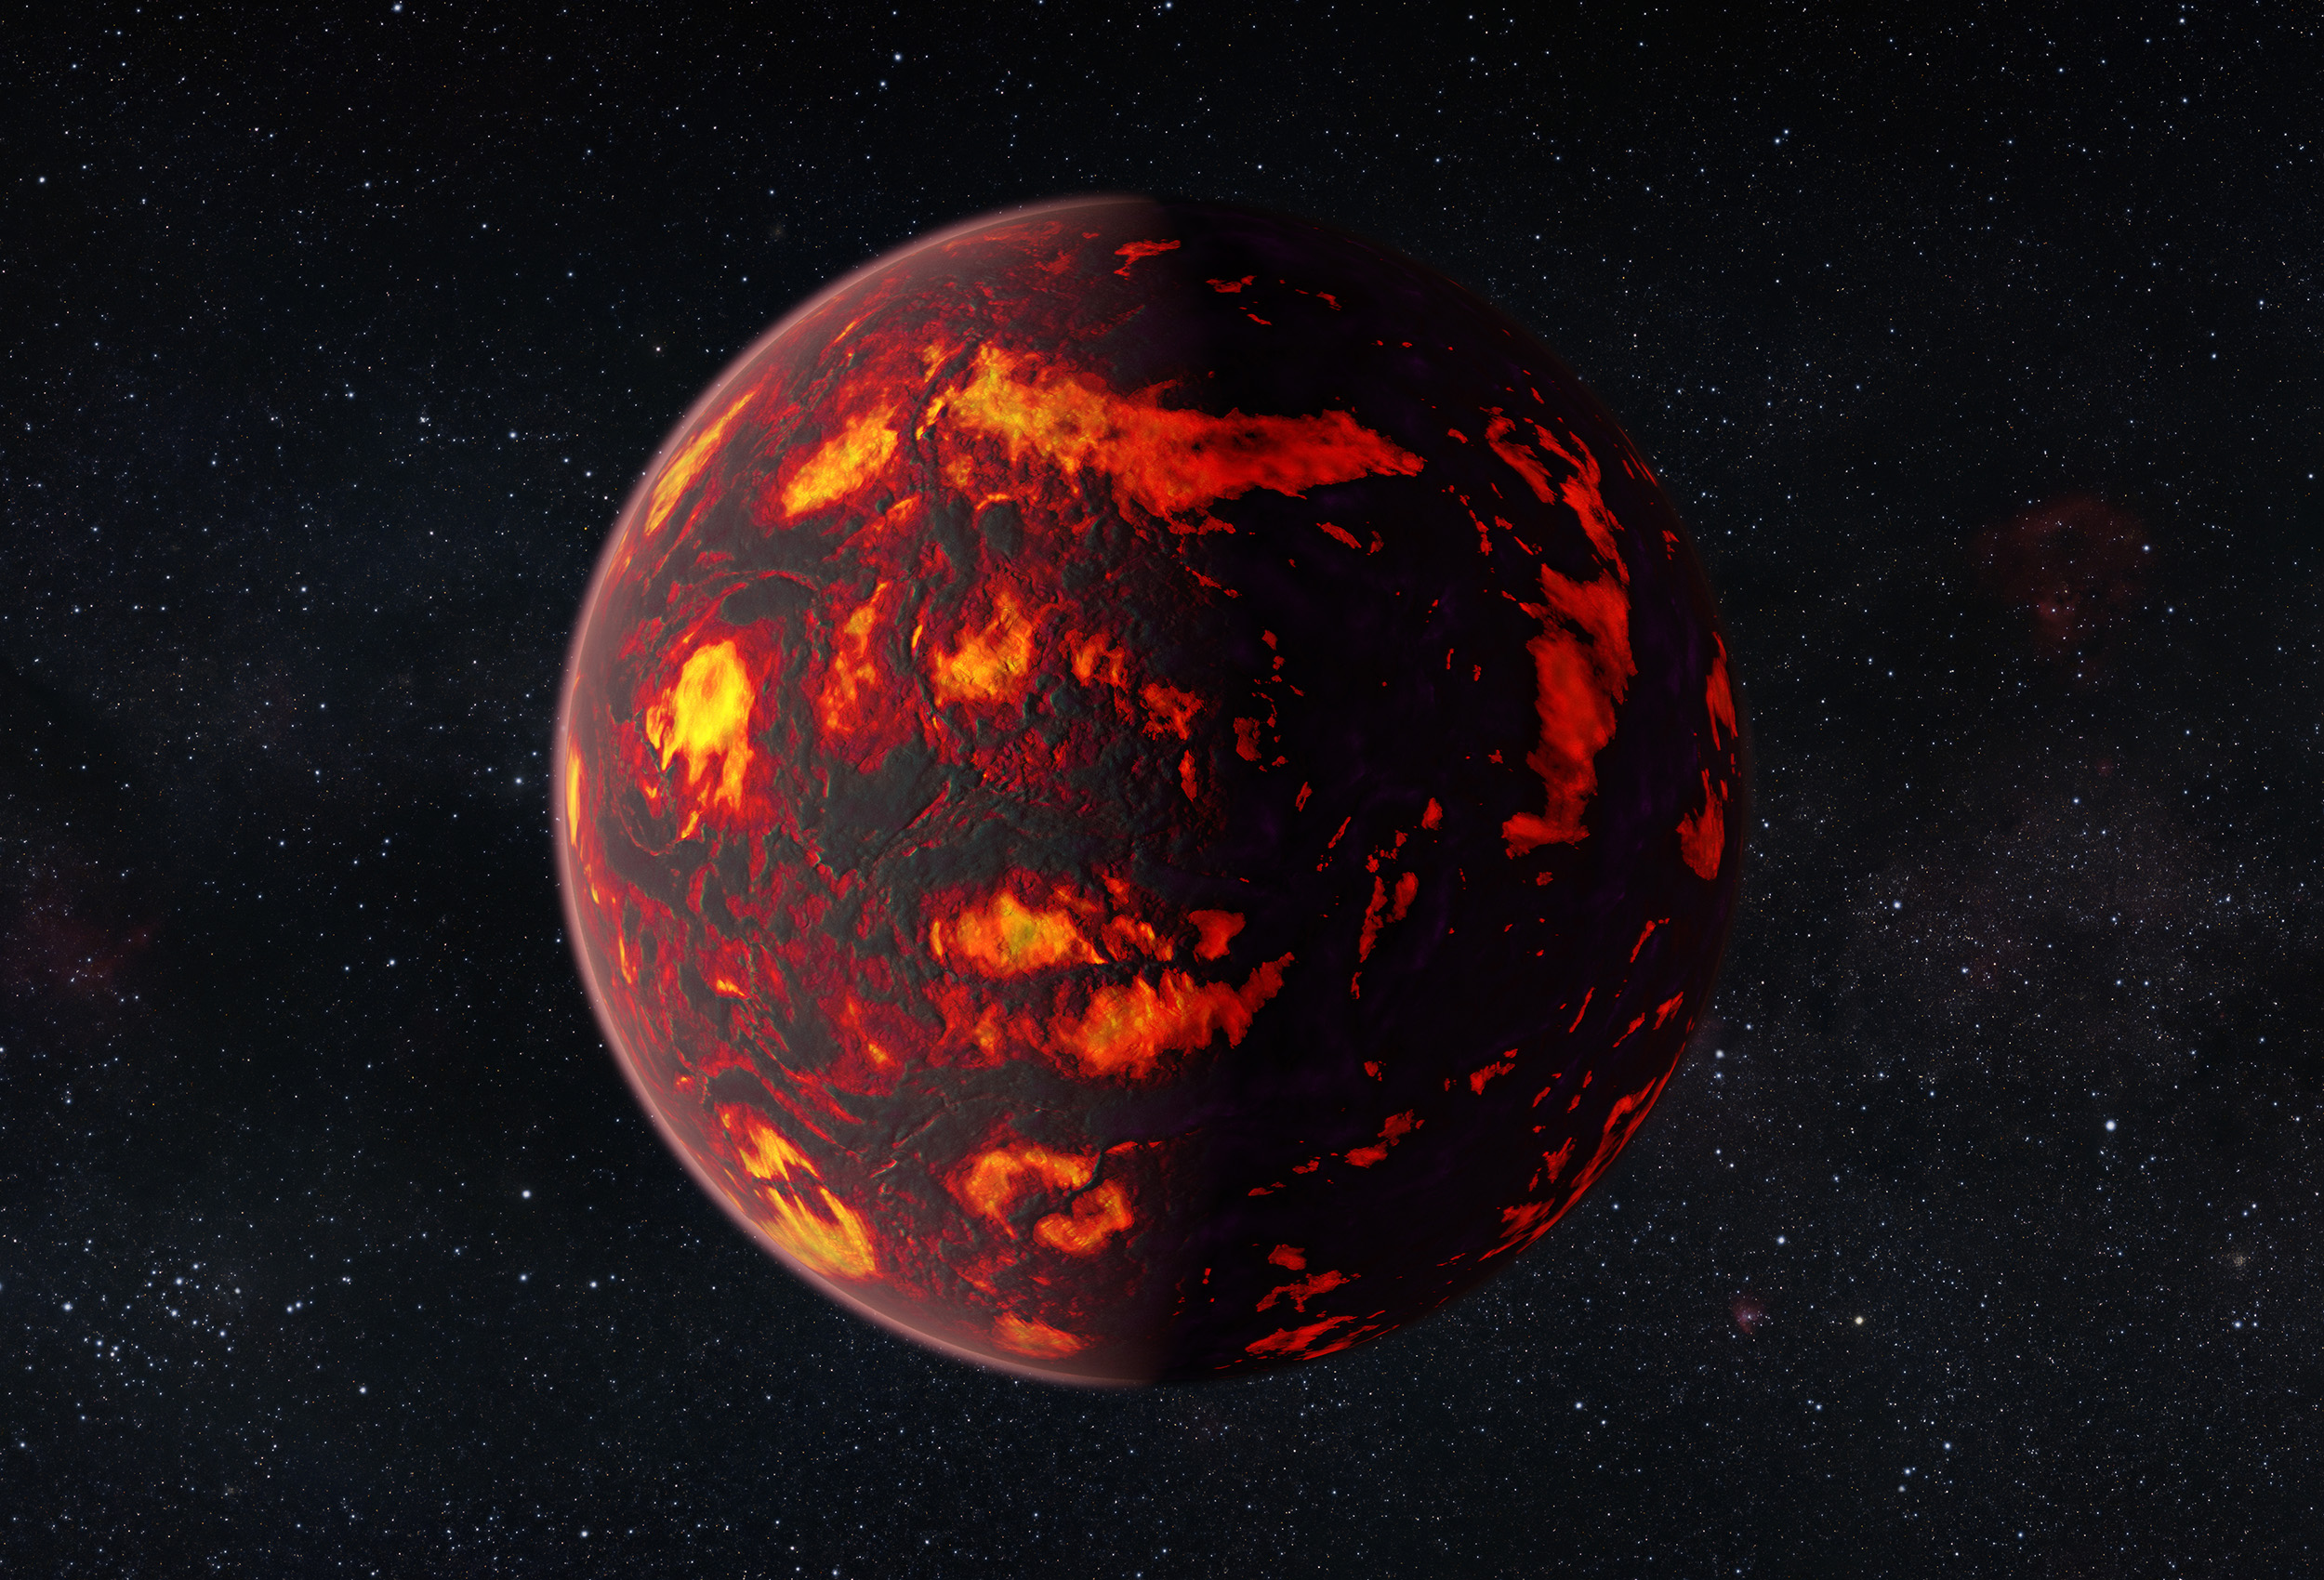 This artist’s impression shows the exoplanet 55 Cancri e as close-up. Due to its proximity to its parent star, the temperatures on the surface of the planet are thought to reach about 2000 degrees Celsius. Scientists were able to analyze the atmosphere of 55 Cancri e. It was the first time this was possible for a super-Earth exoplanet. (ESA/Hubble/M. Kornmesser)